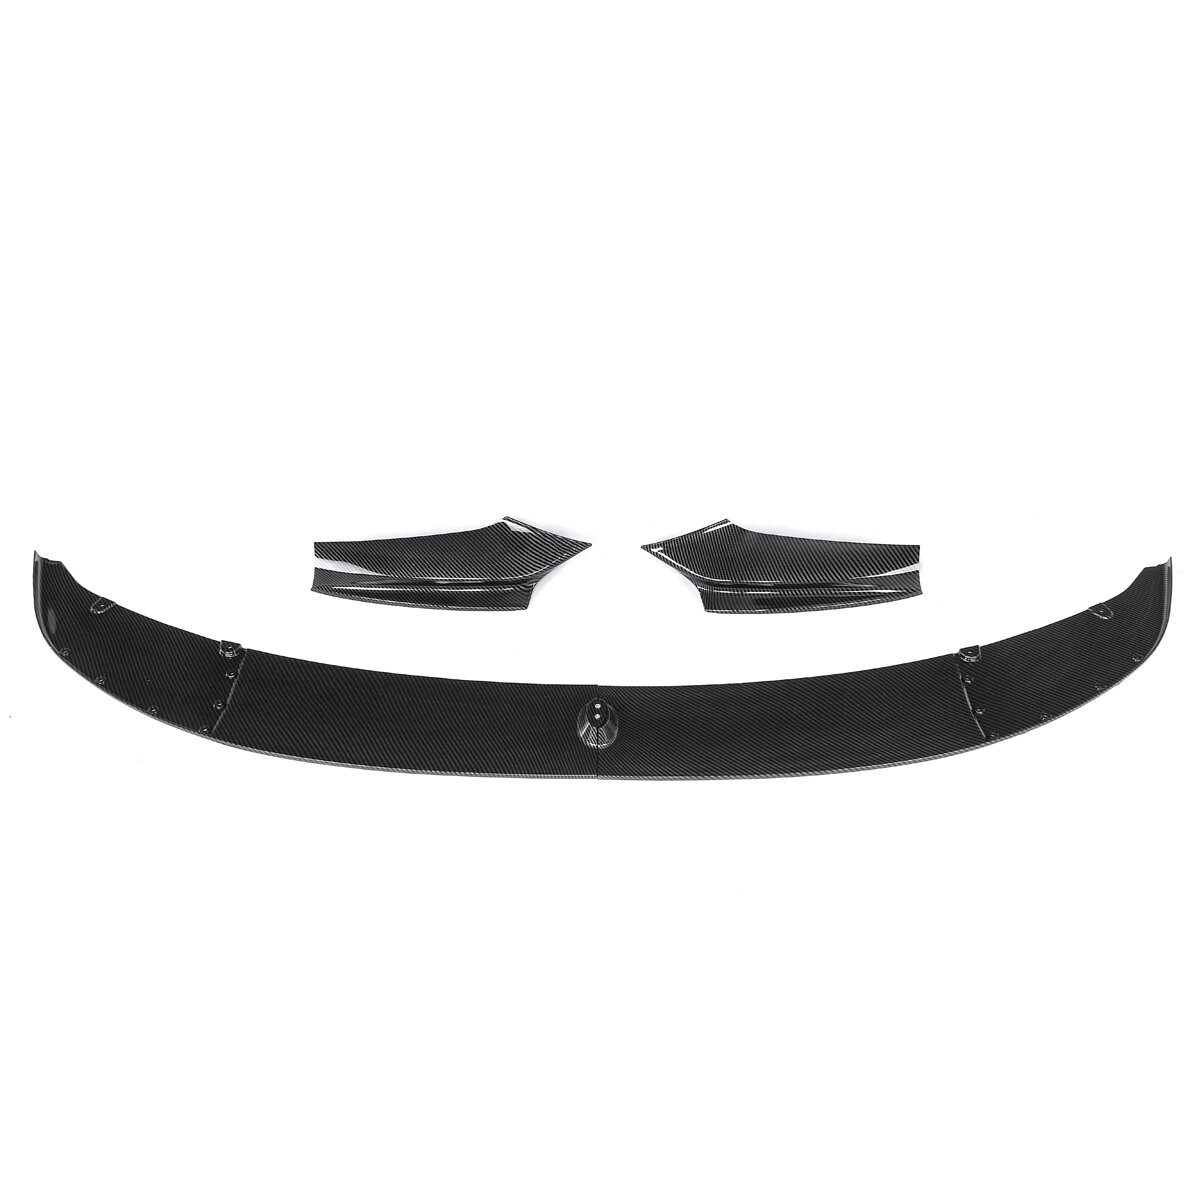 CARBON LOOK FRONT DIFFUSER SPLITTER LIP SPOILER FOR BMW 5 SERIES F10 F11 M SPORT